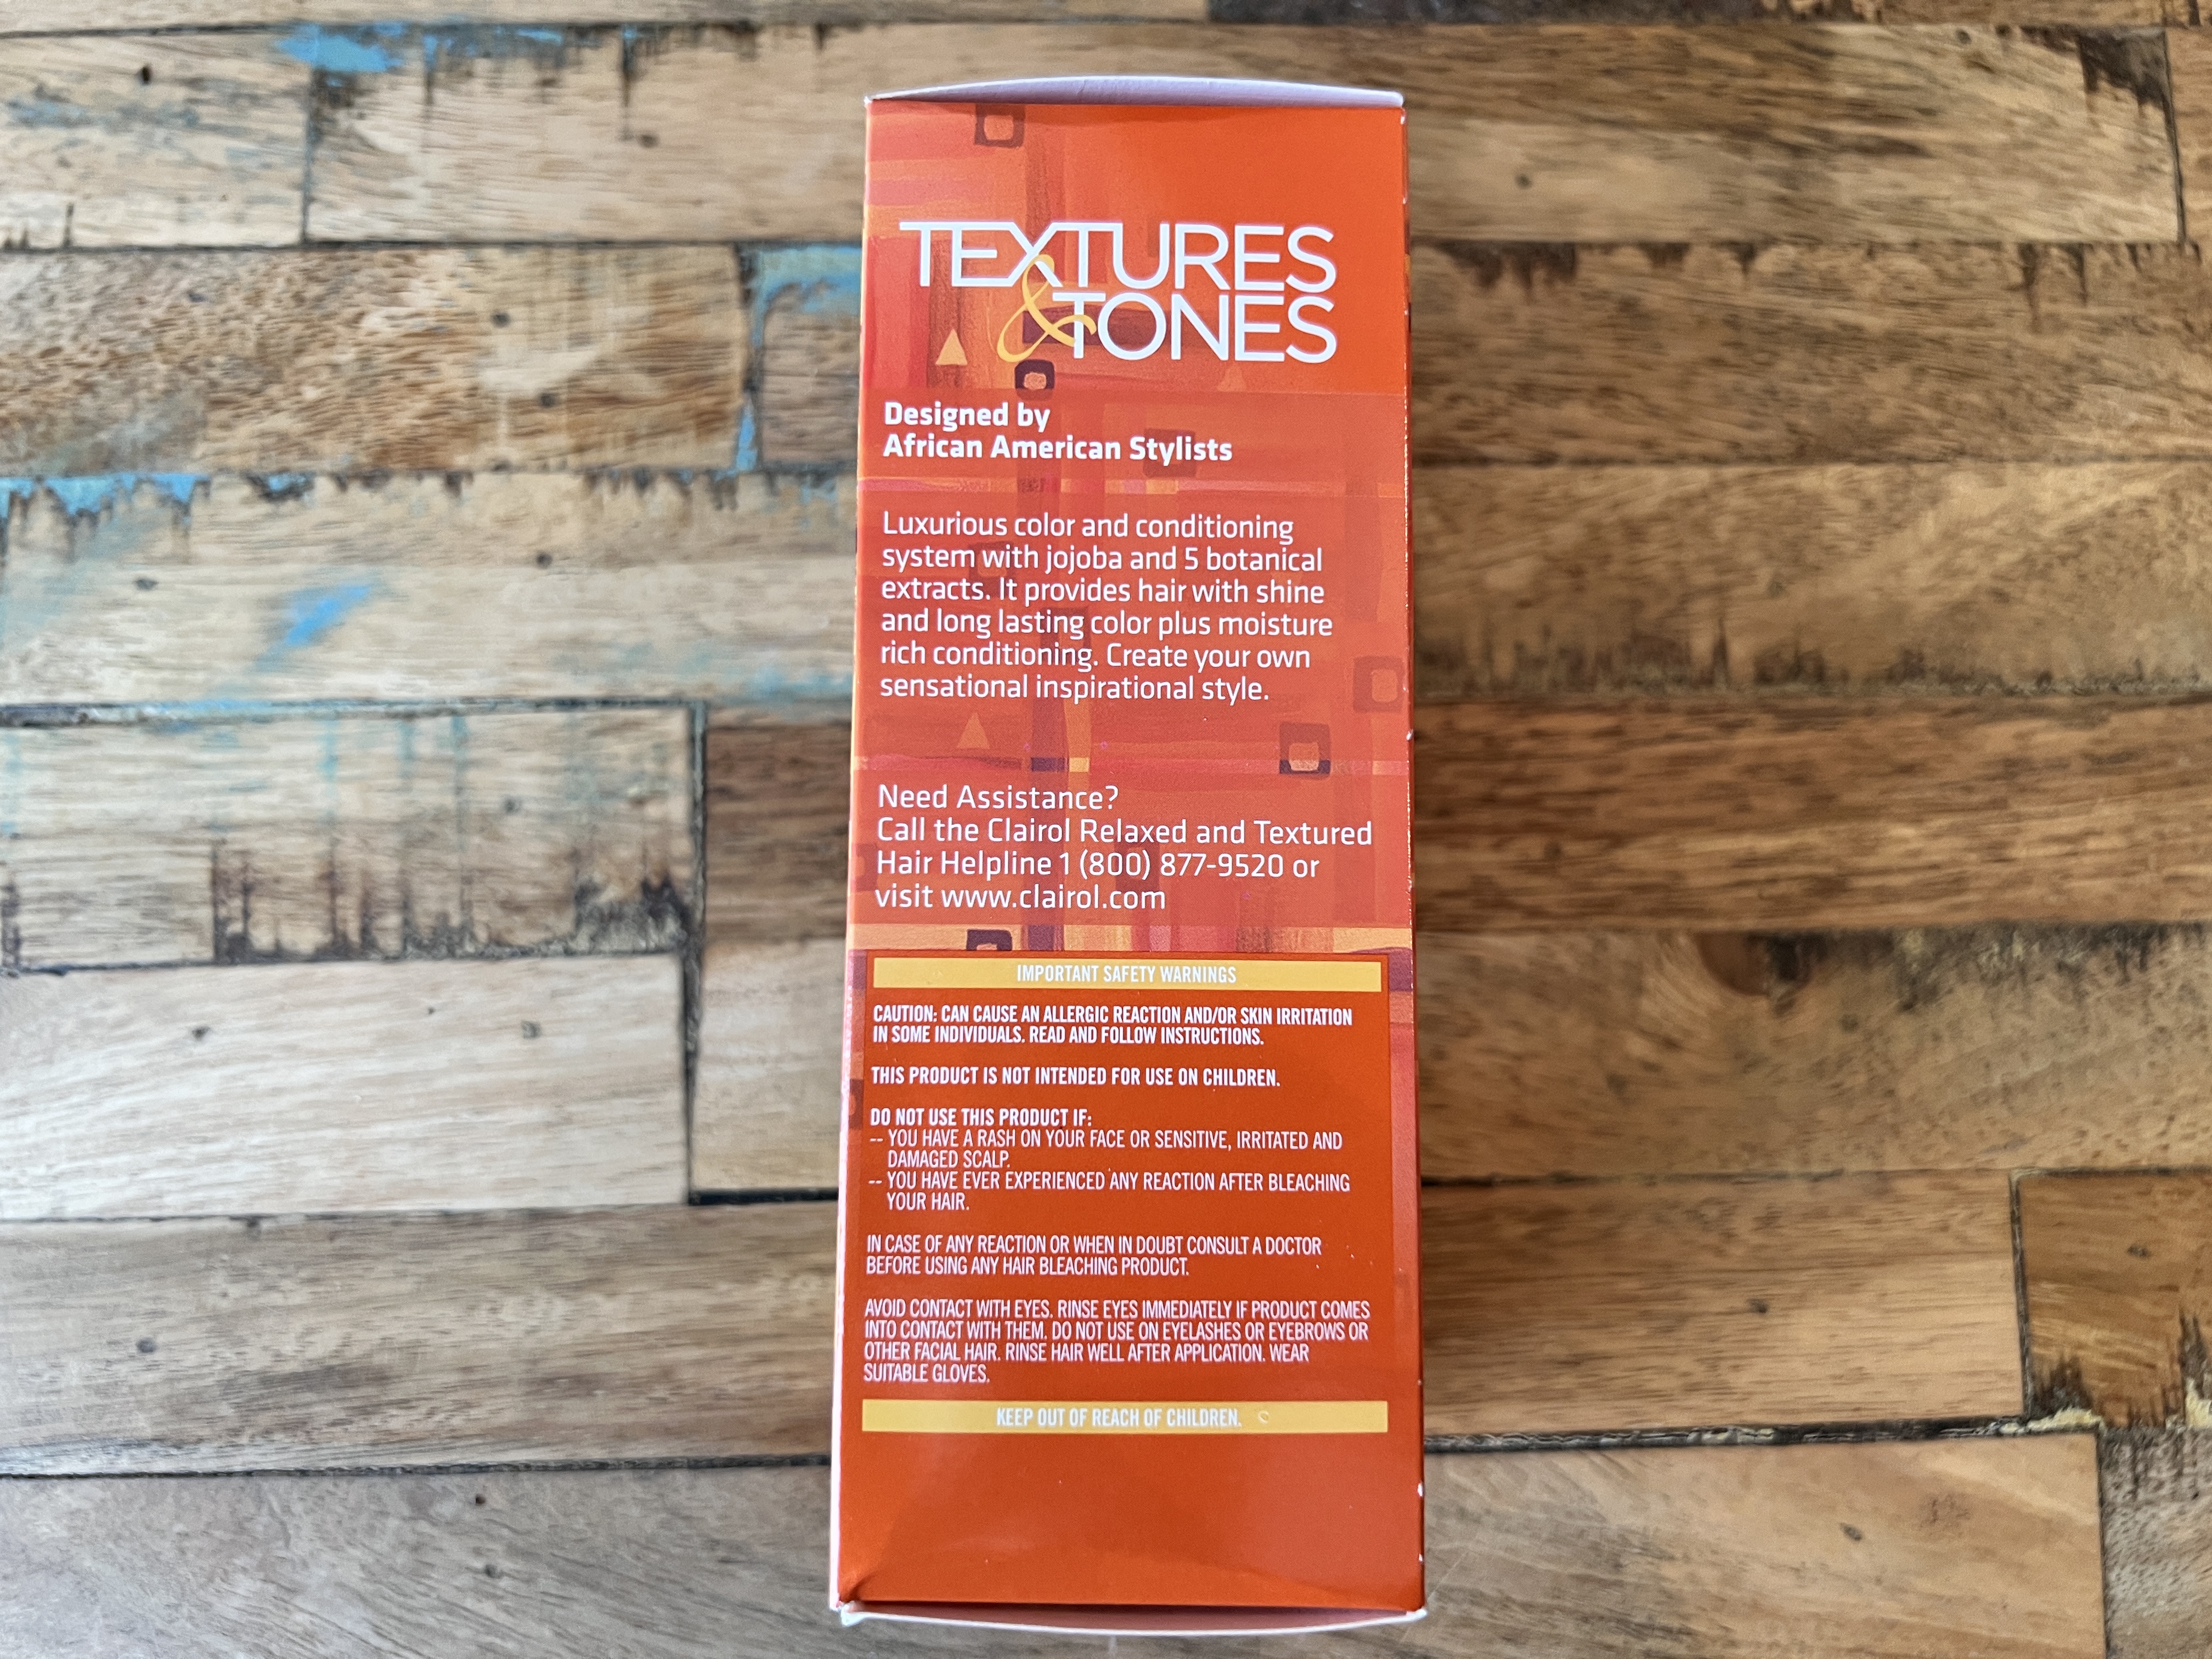 Clarirol's Textures & Tones was designed by African American stylists for women of color.